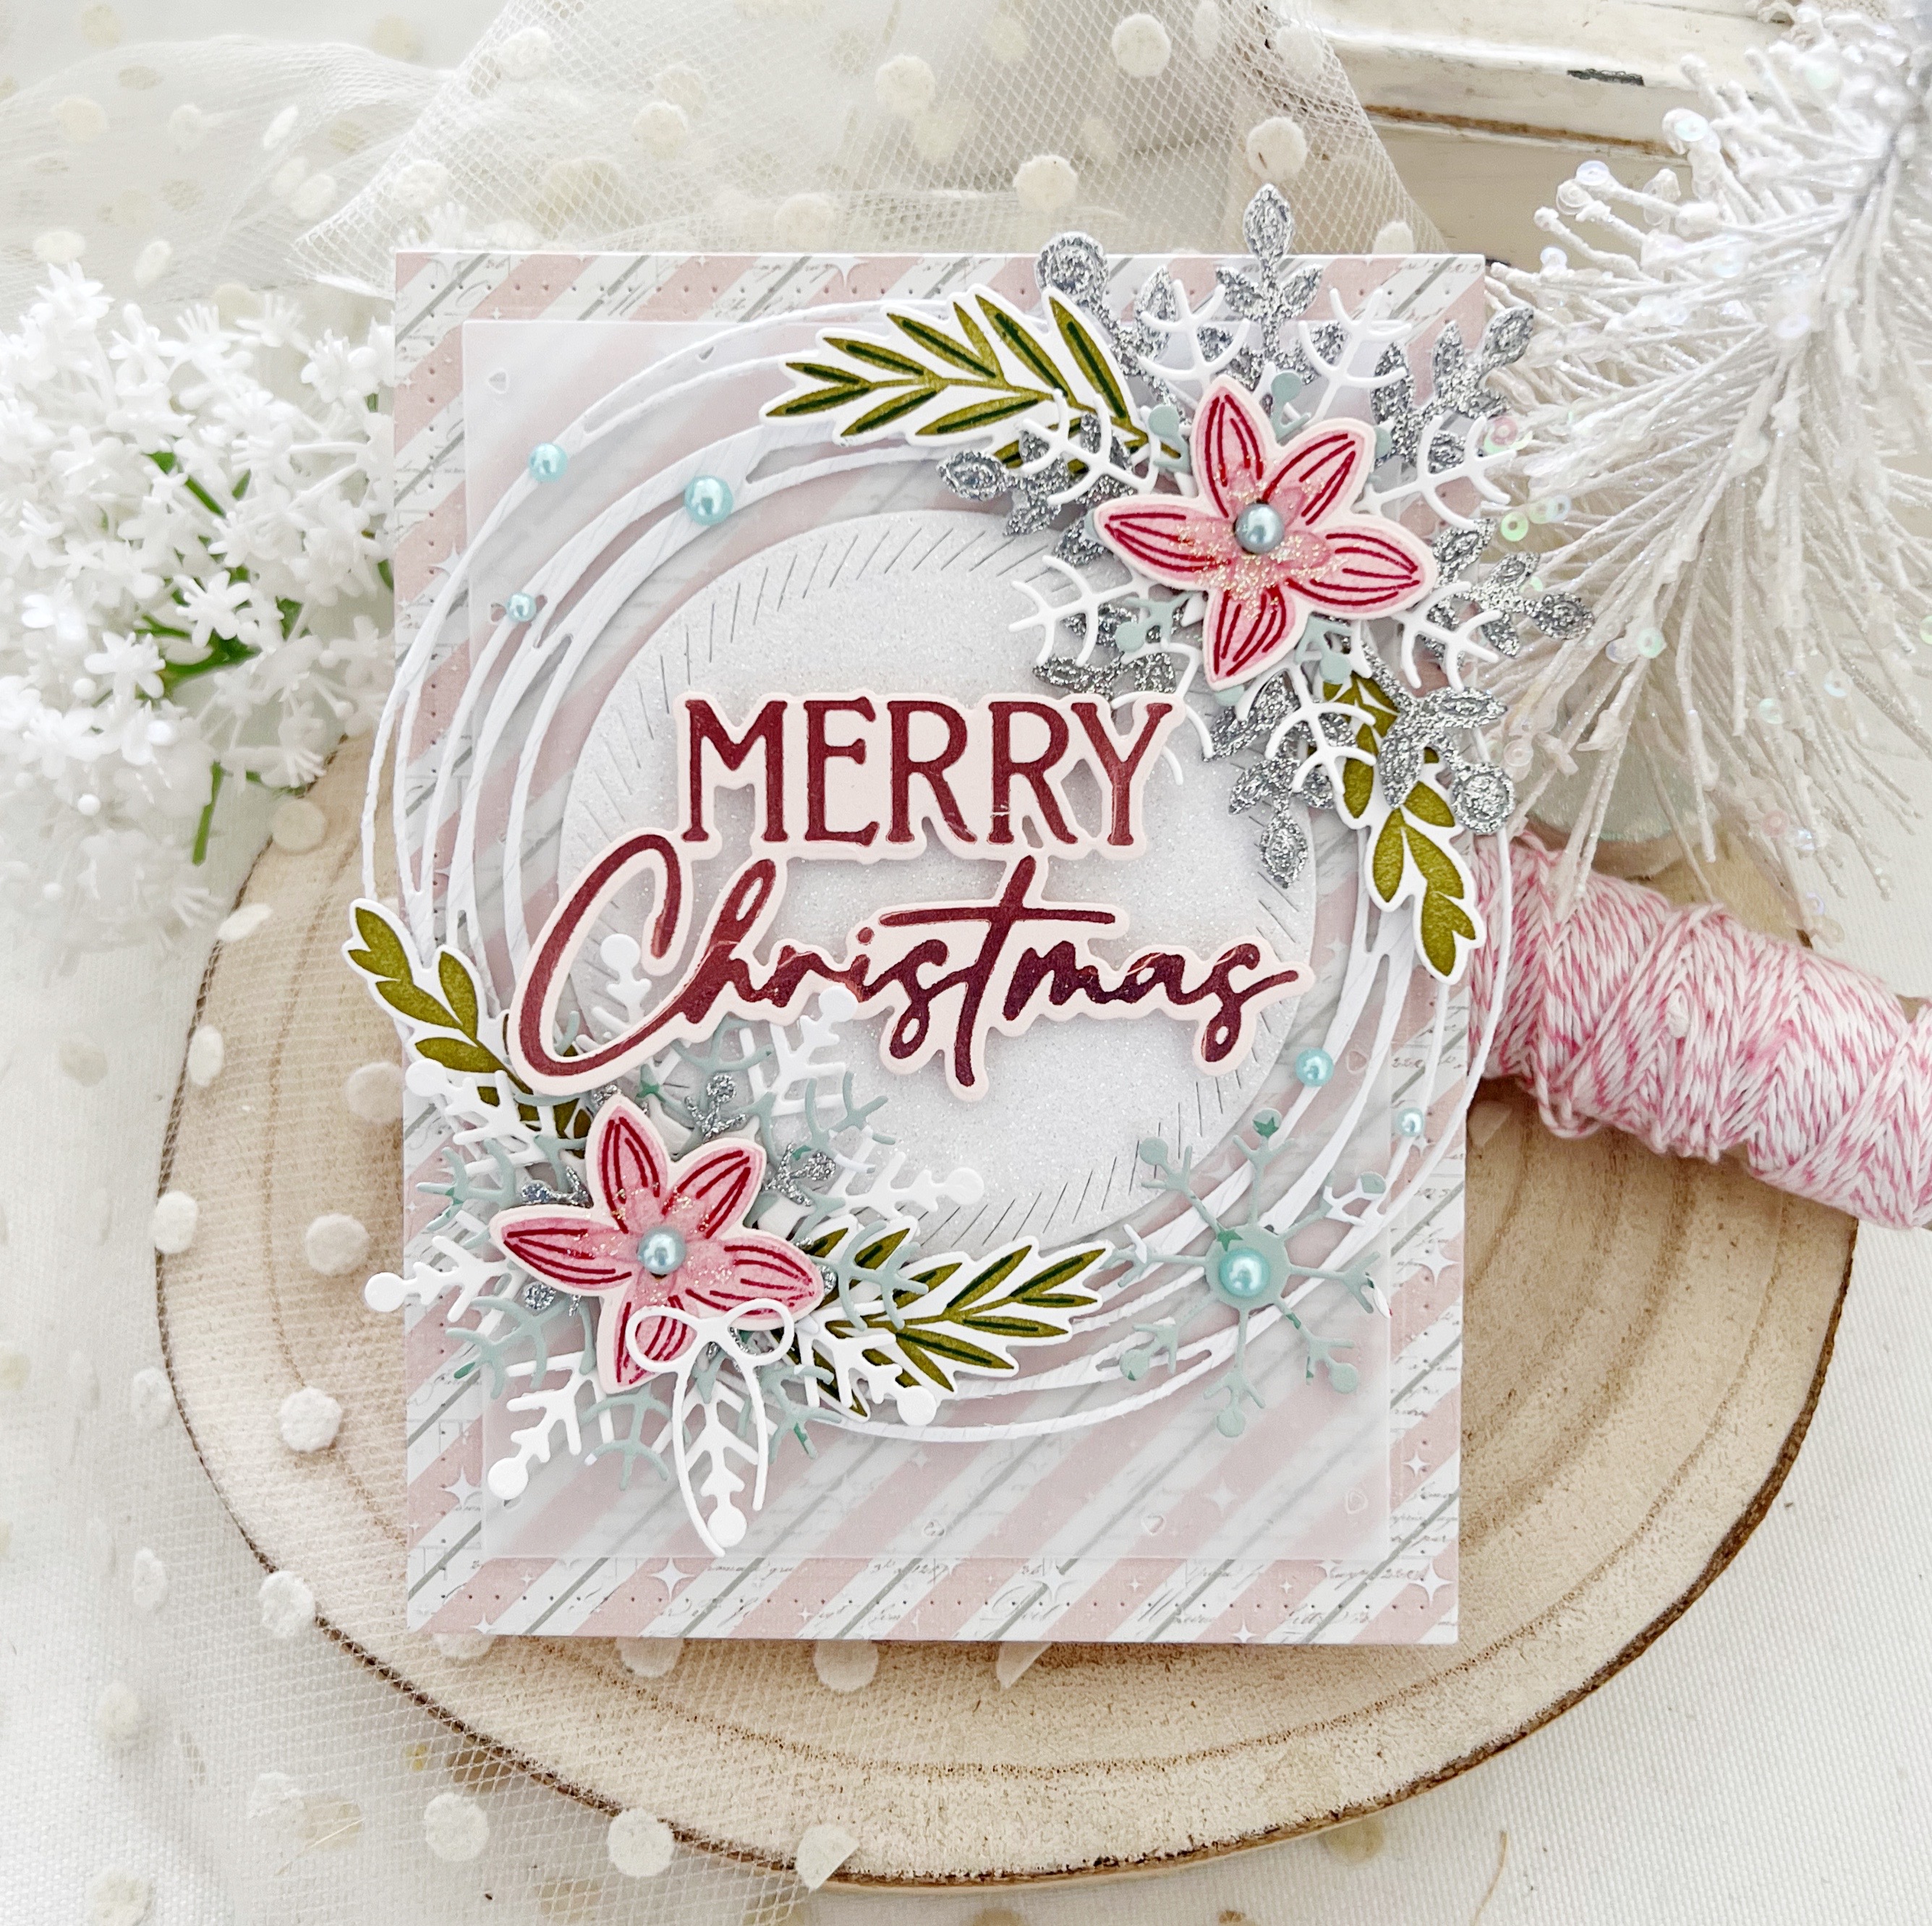 Merry Christmas Hot Foil Plate + Coordinating Die